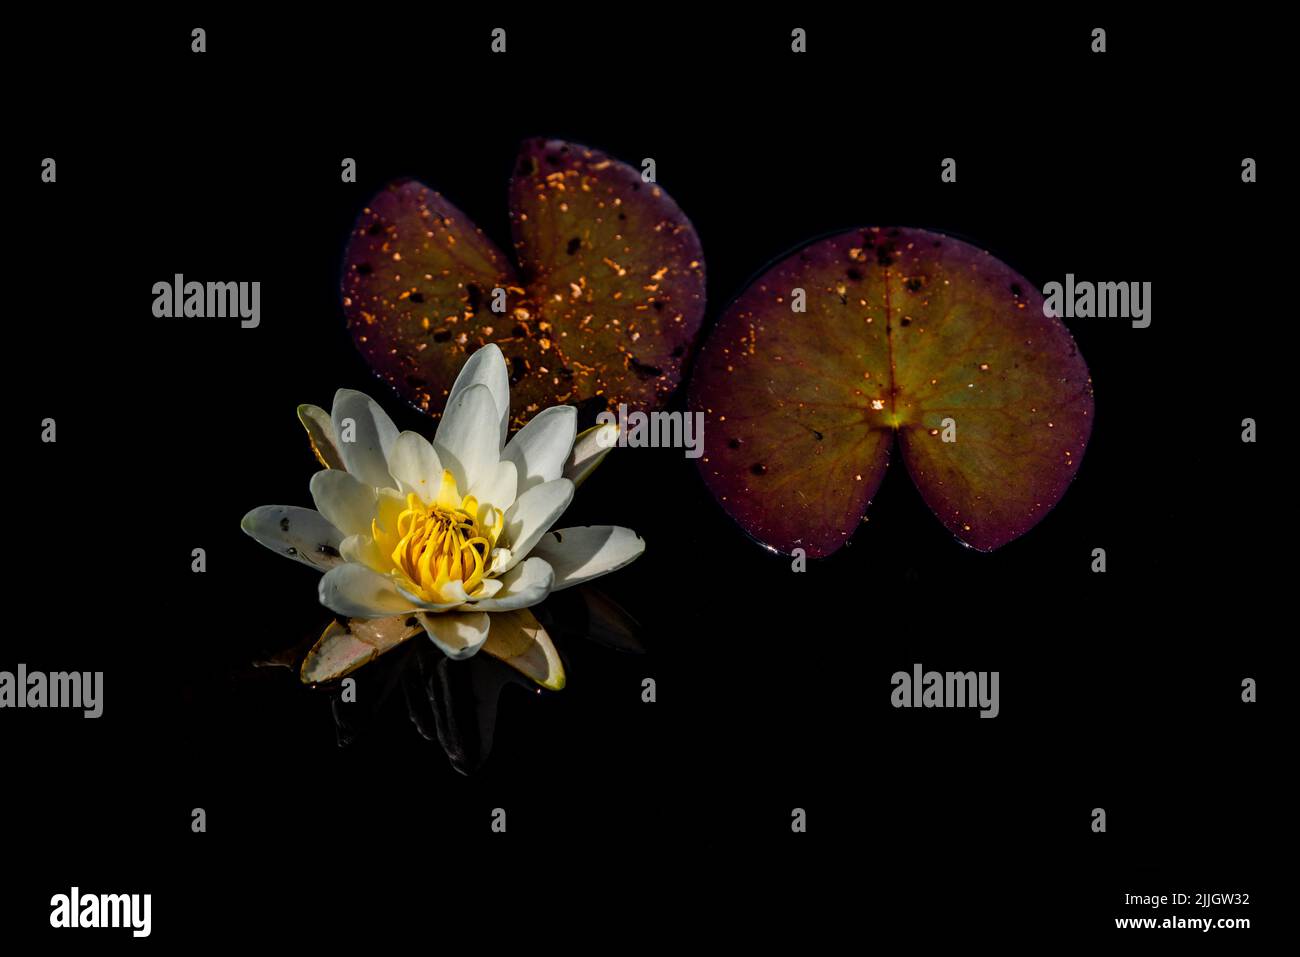 Beautiful flower of European White Water Lily (Nymphaea alba) and leaves floating on calm black waters of a bog in central Estonia. Stock Photo